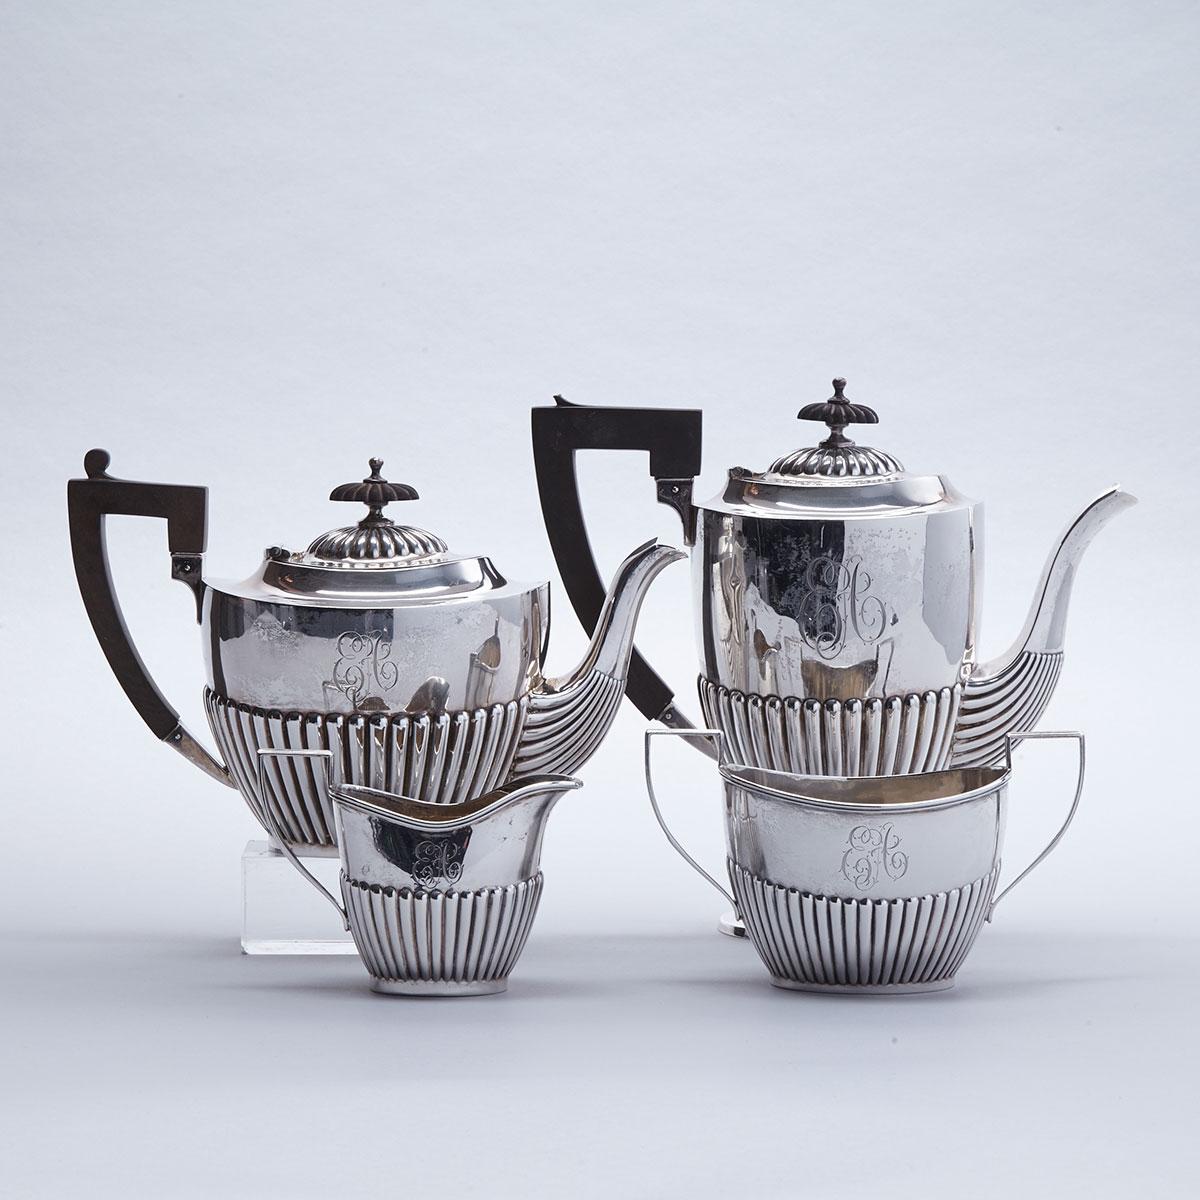 Canadian Silver Tea and Coffee Service, J.E. Ellis & Co., Toronto, Ont., early 20th century